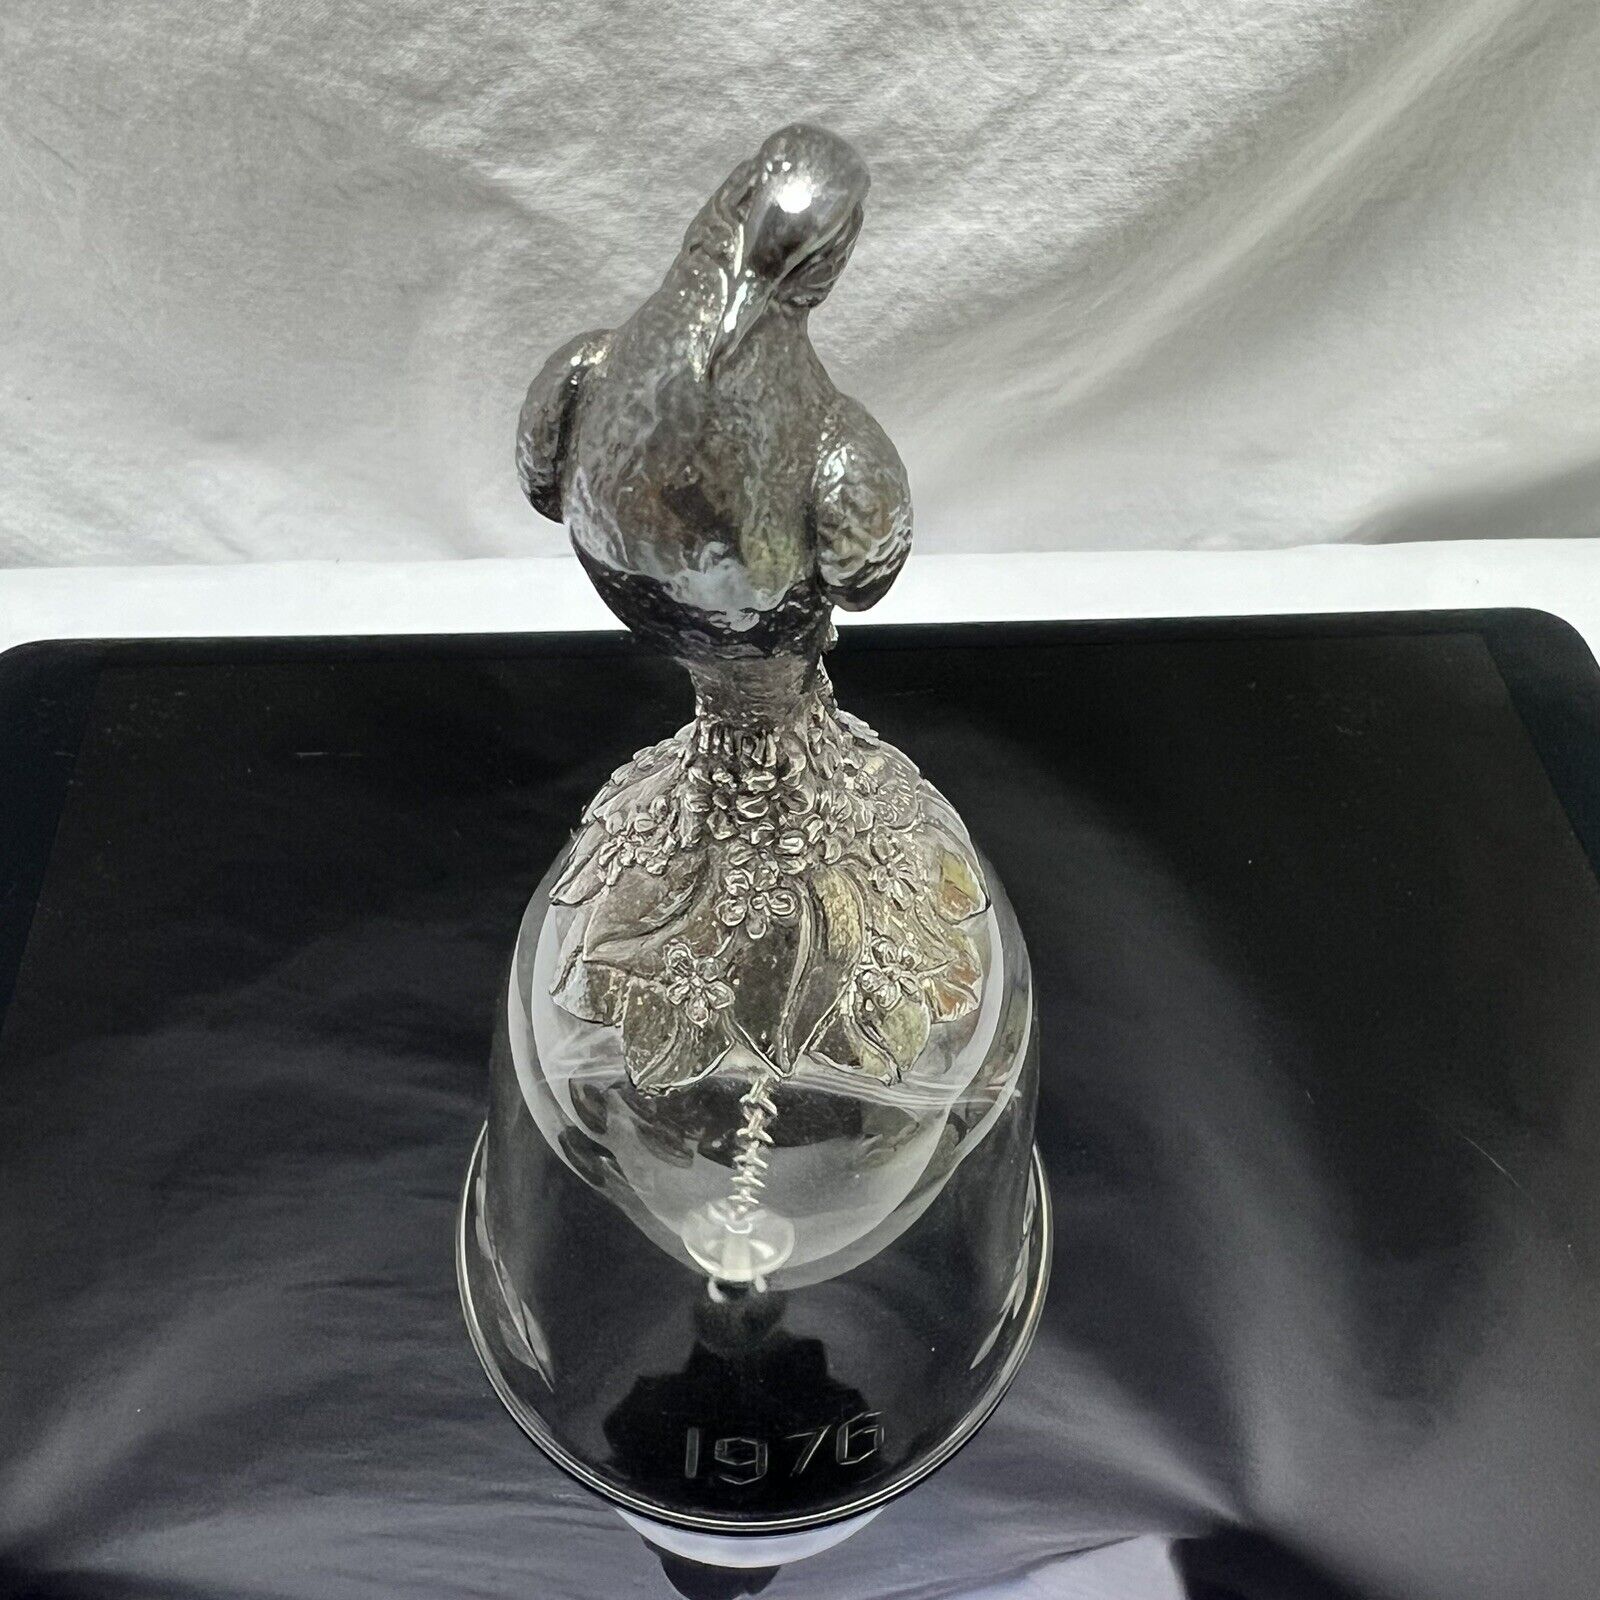 Franklin Mint 1976 Silver & Crystal Bicentennial Bell with Dove Handle